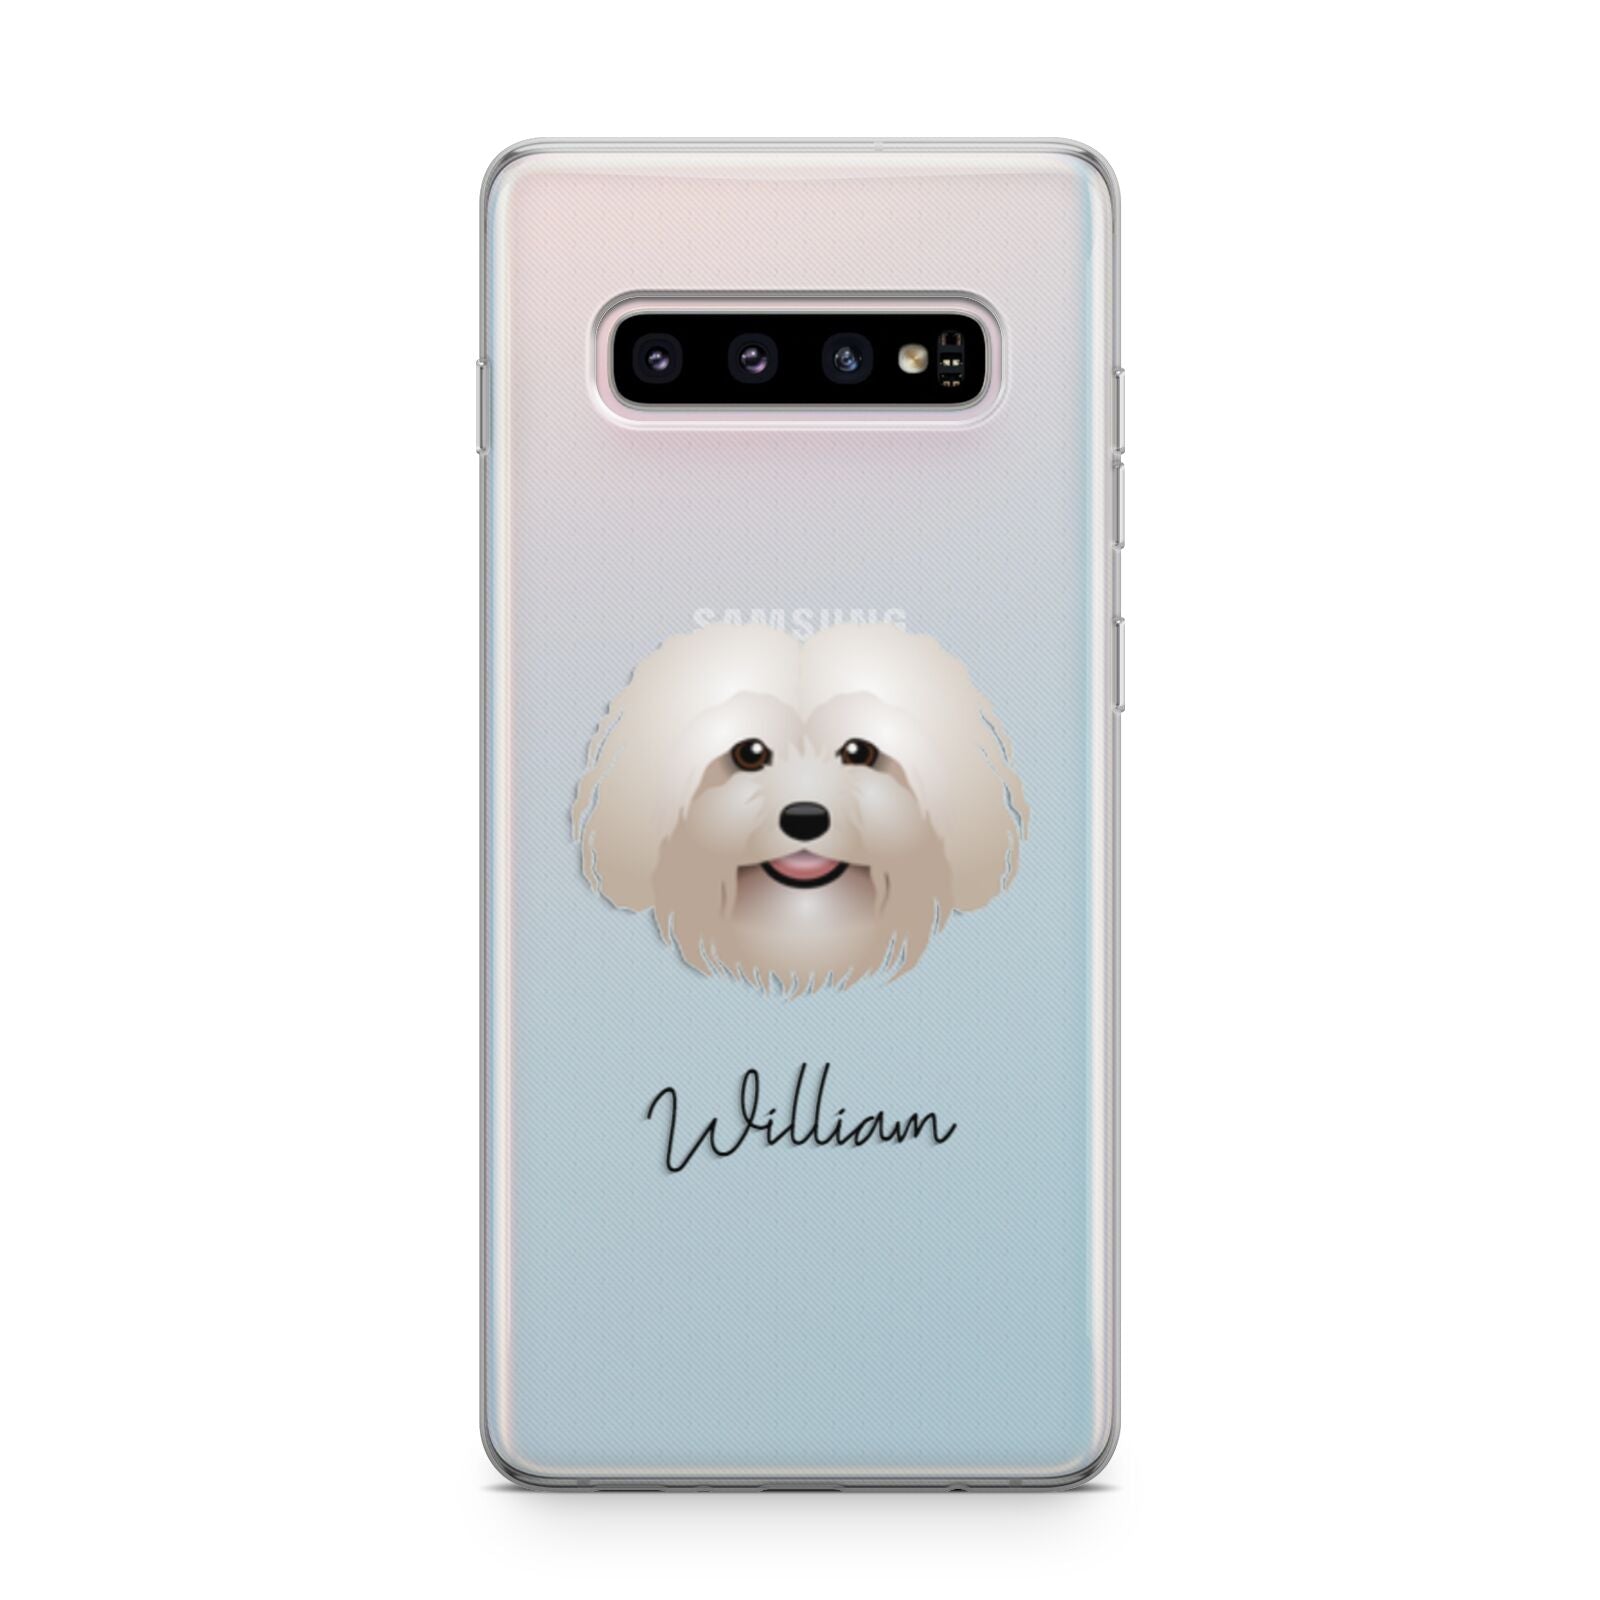 Bolognese Personalised Samsung Galaxy S10 Plus Case